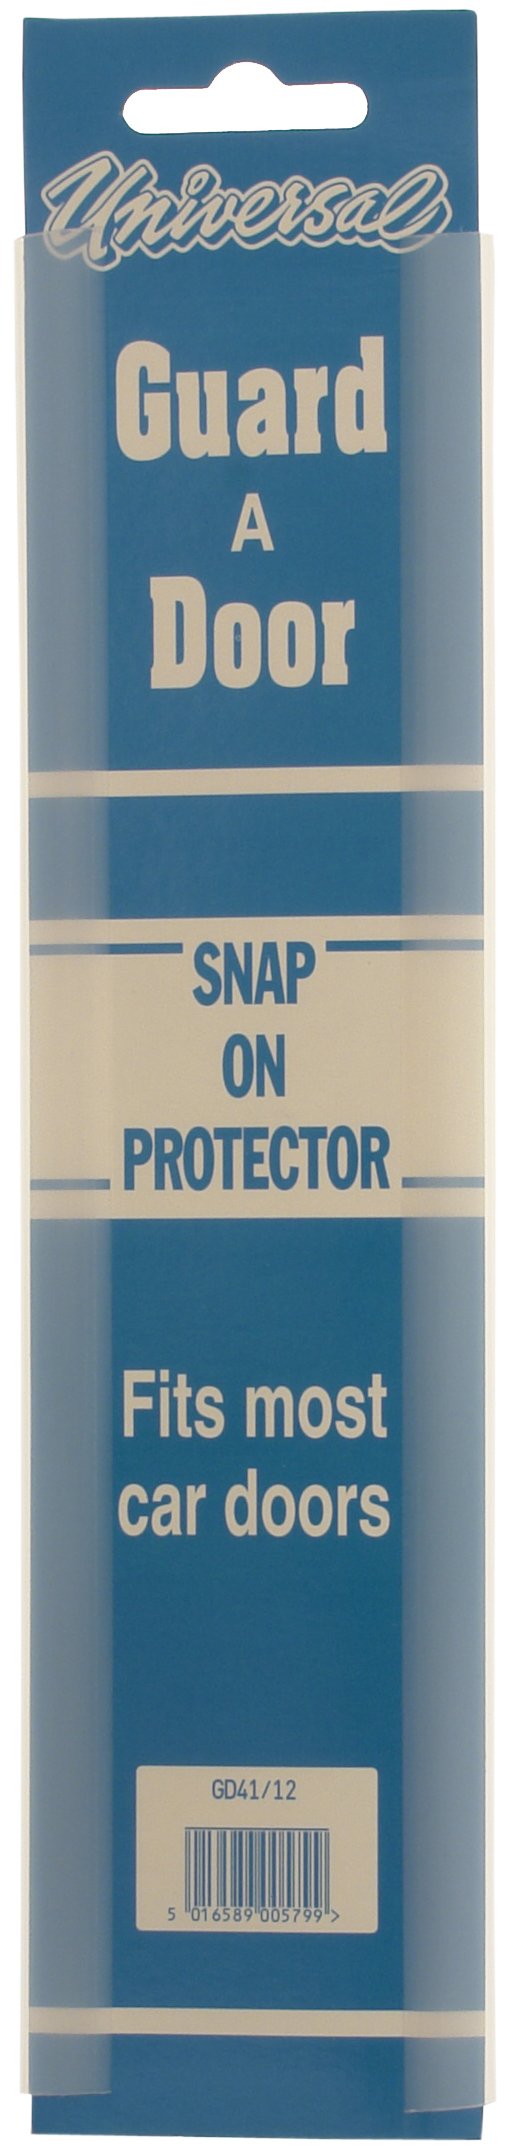 Universal Guard A Door - Snap On Protector - Clear von Universal